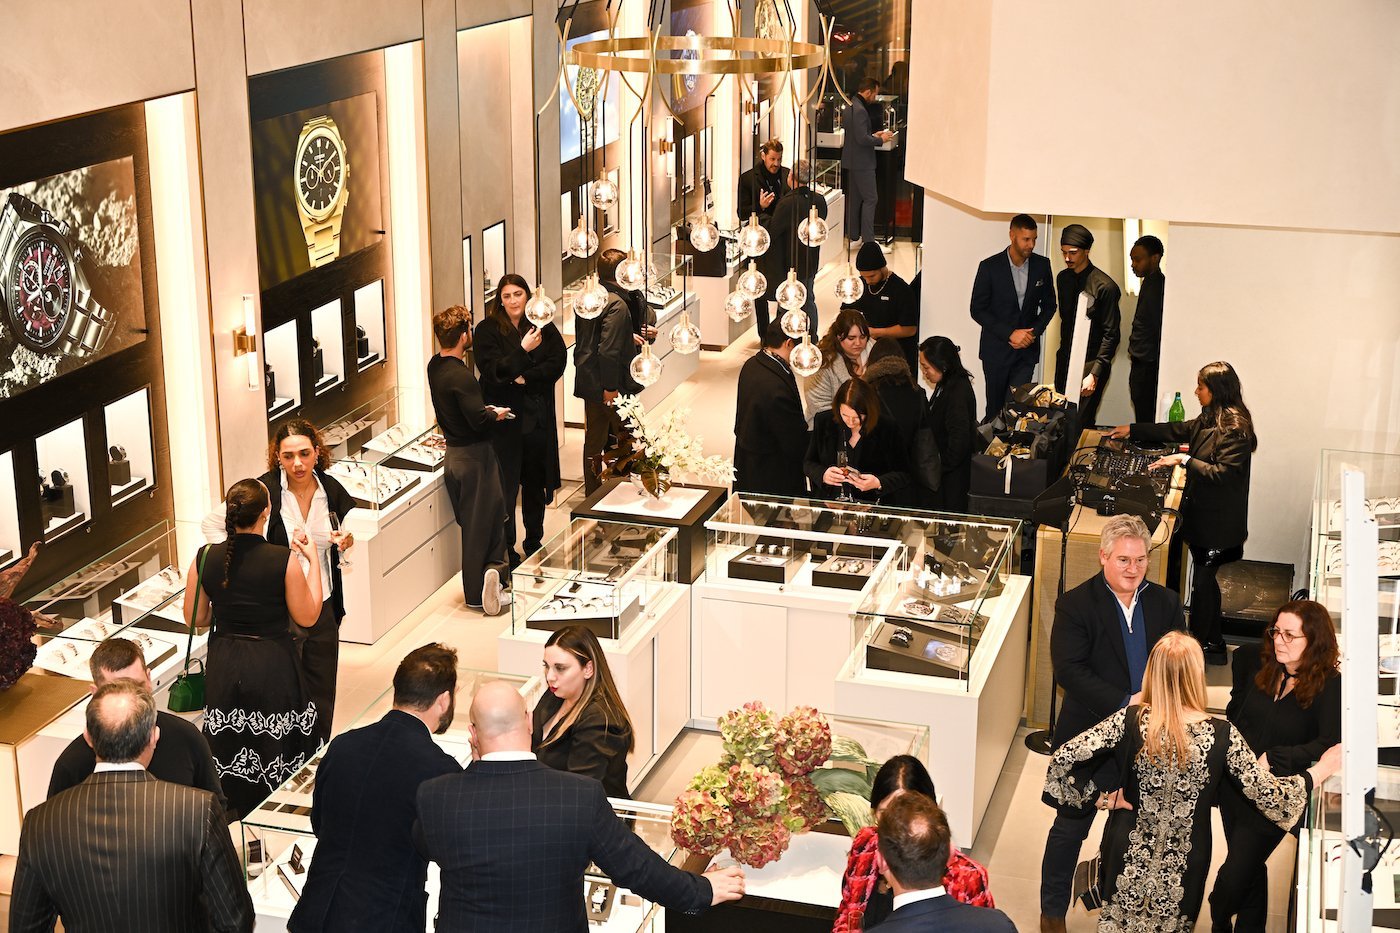 Citizen Watch America brings flagship store to New York's Fifth Avenue